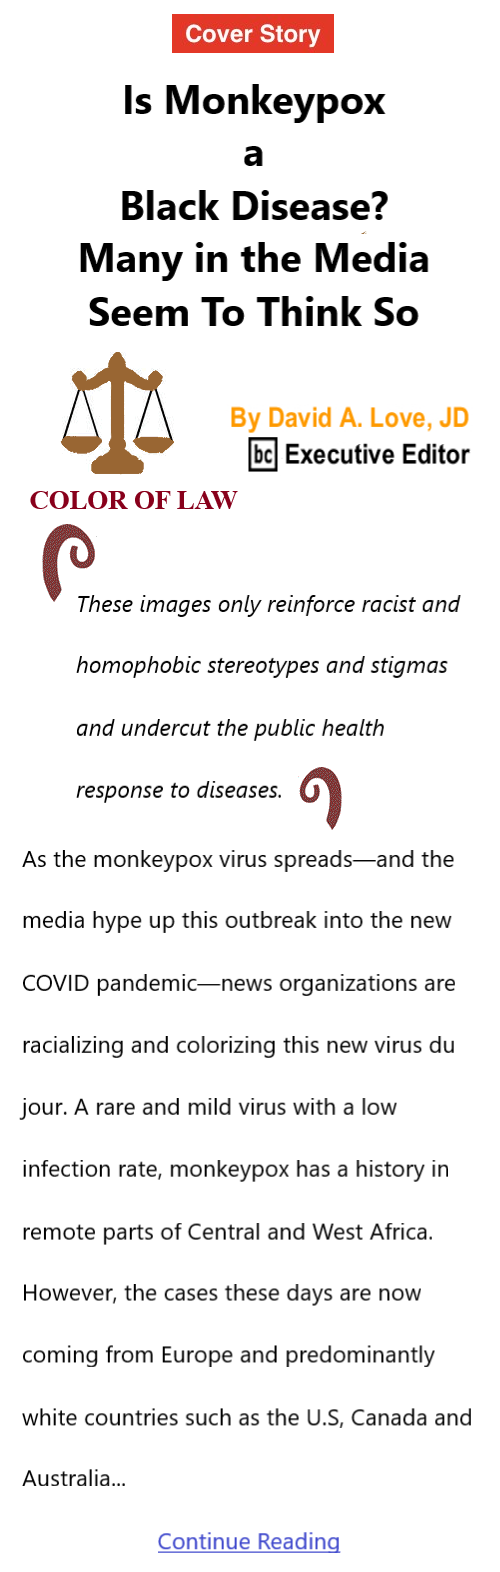 BlackCommentator.com June 16, 2022 - Issue 915: Cover Story Is Monkeypox a Black Disease? Many in the Media Seem To Think So - Color of Law By David A. Love, JD, BC Executive Editor